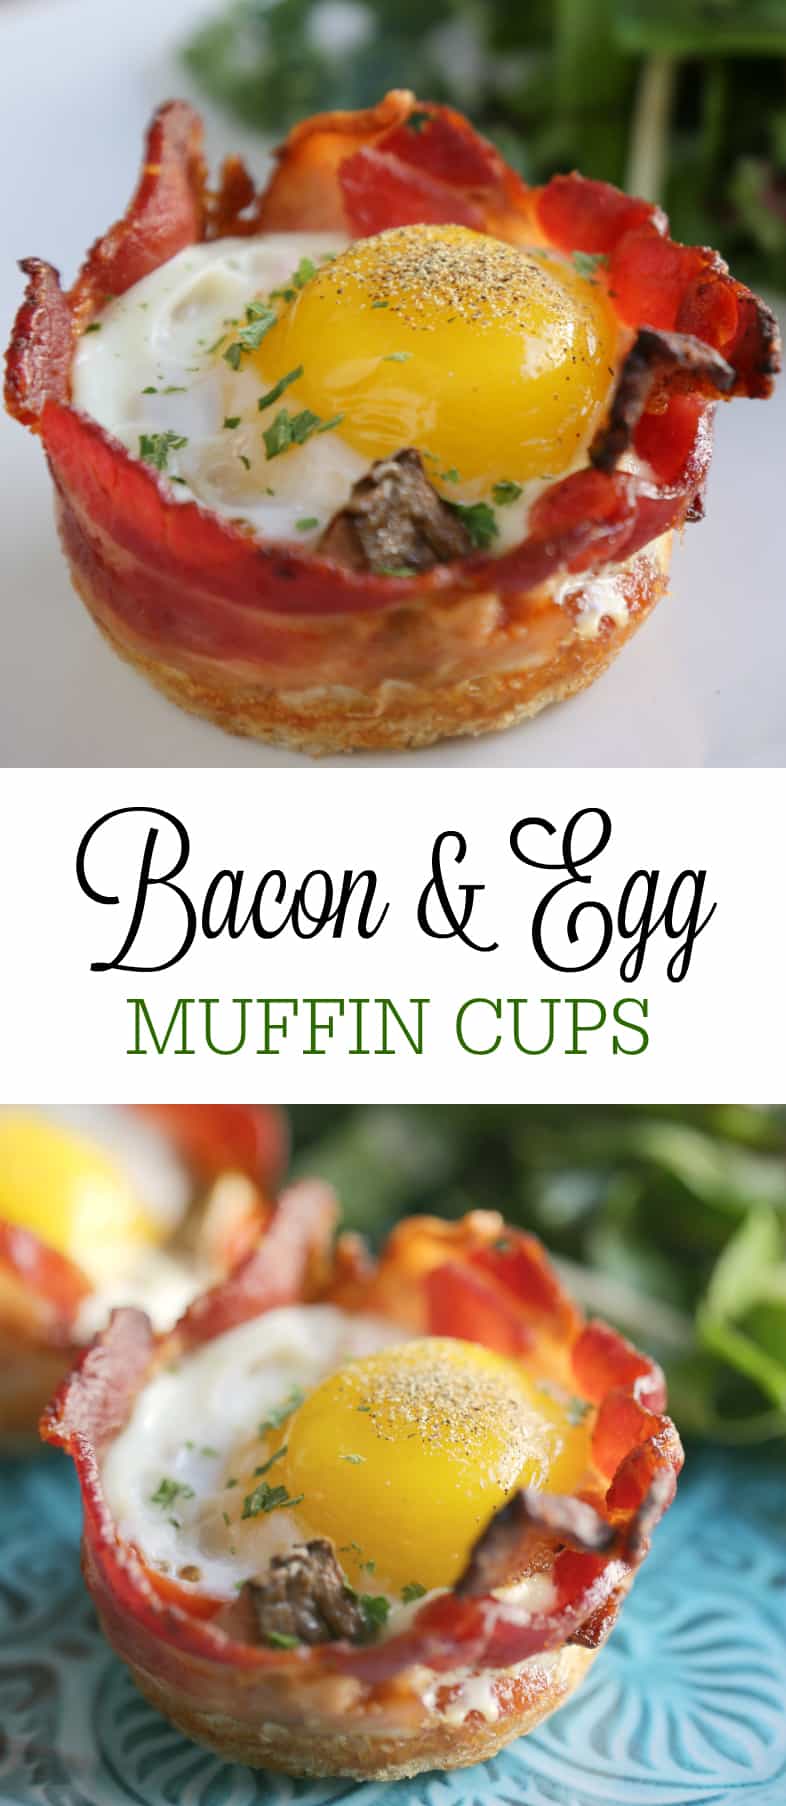 bacon and egg muffin cups recipe